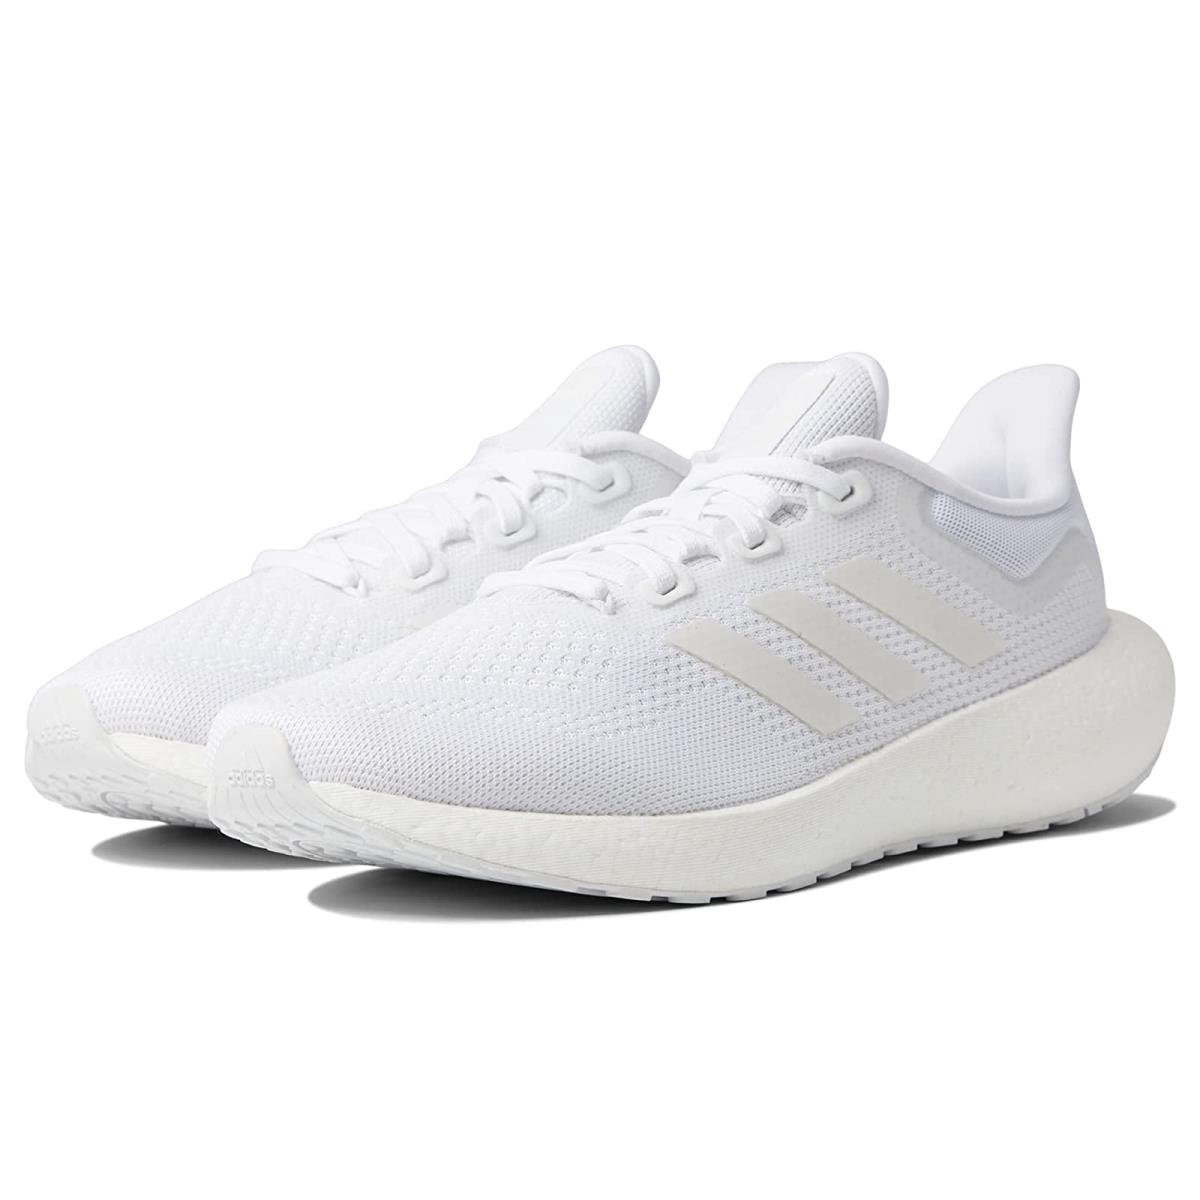 Man`s Sneakers Athletic Shoes Adidas Running Pureboost Jet White/White/Black